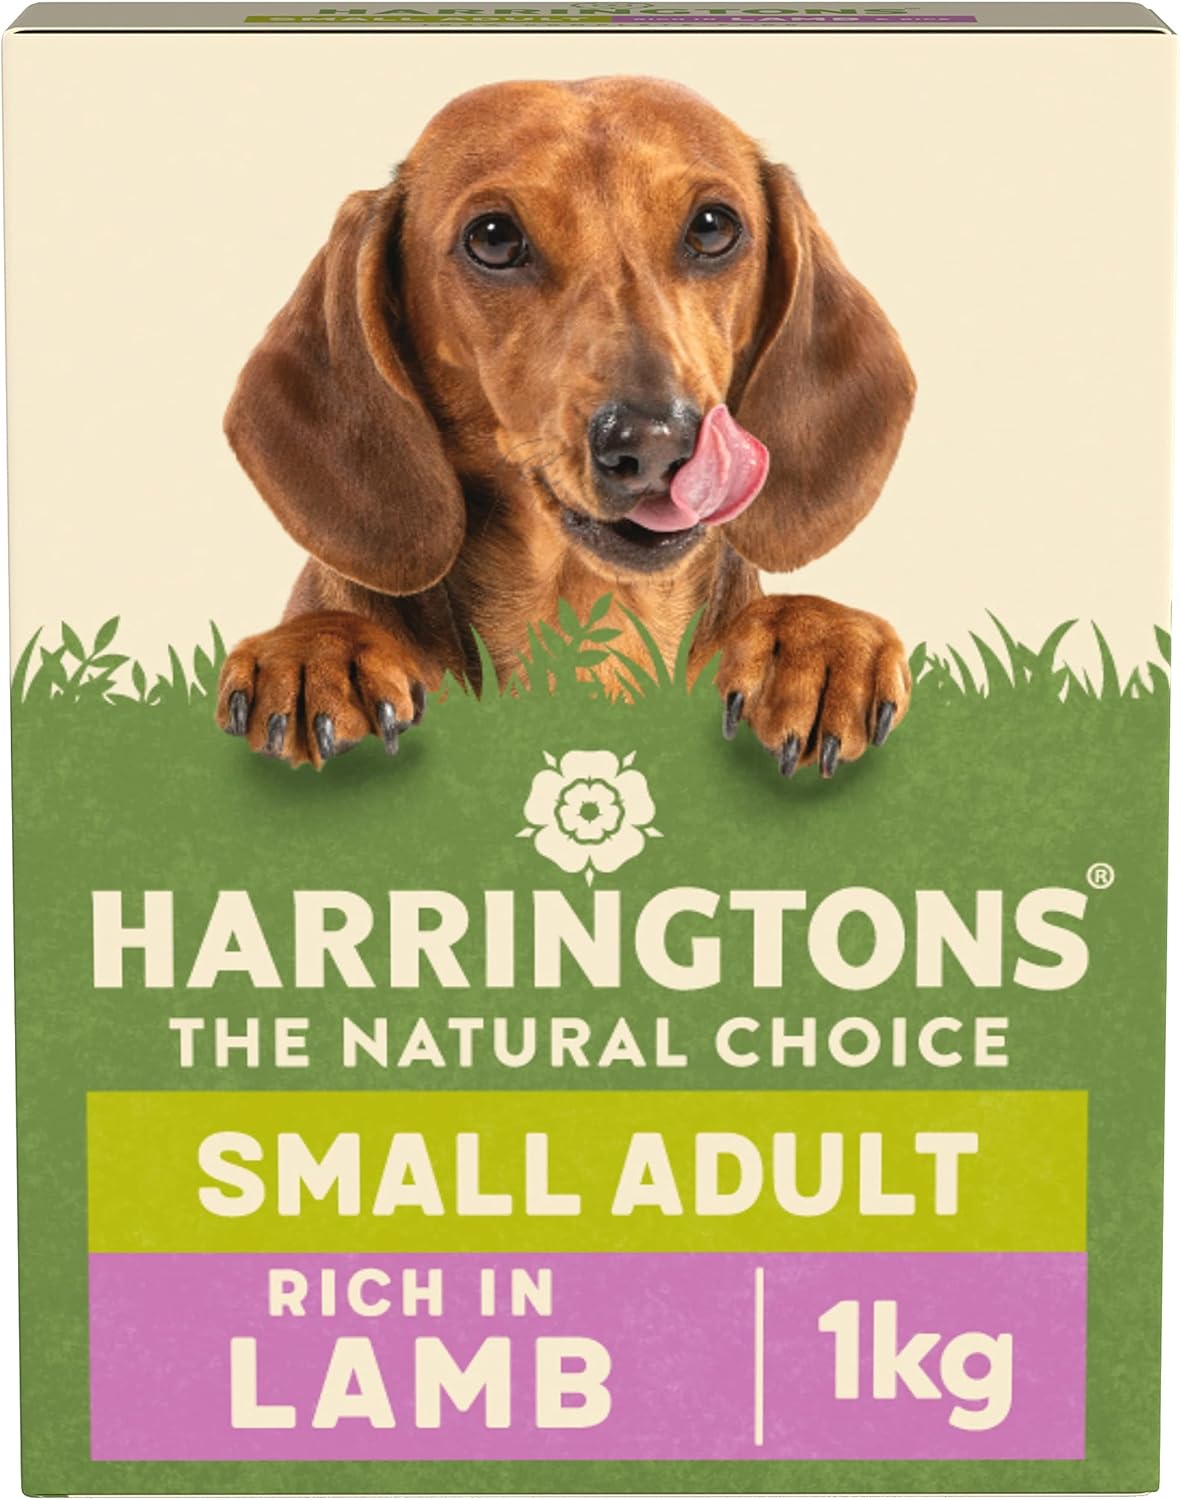 Harringtons Complete Small Breed Dry Adult Dog Food Lamb & Rice 1kg (Pack of 4) - Made with All Natural Ingredients?HARRSDL-B1